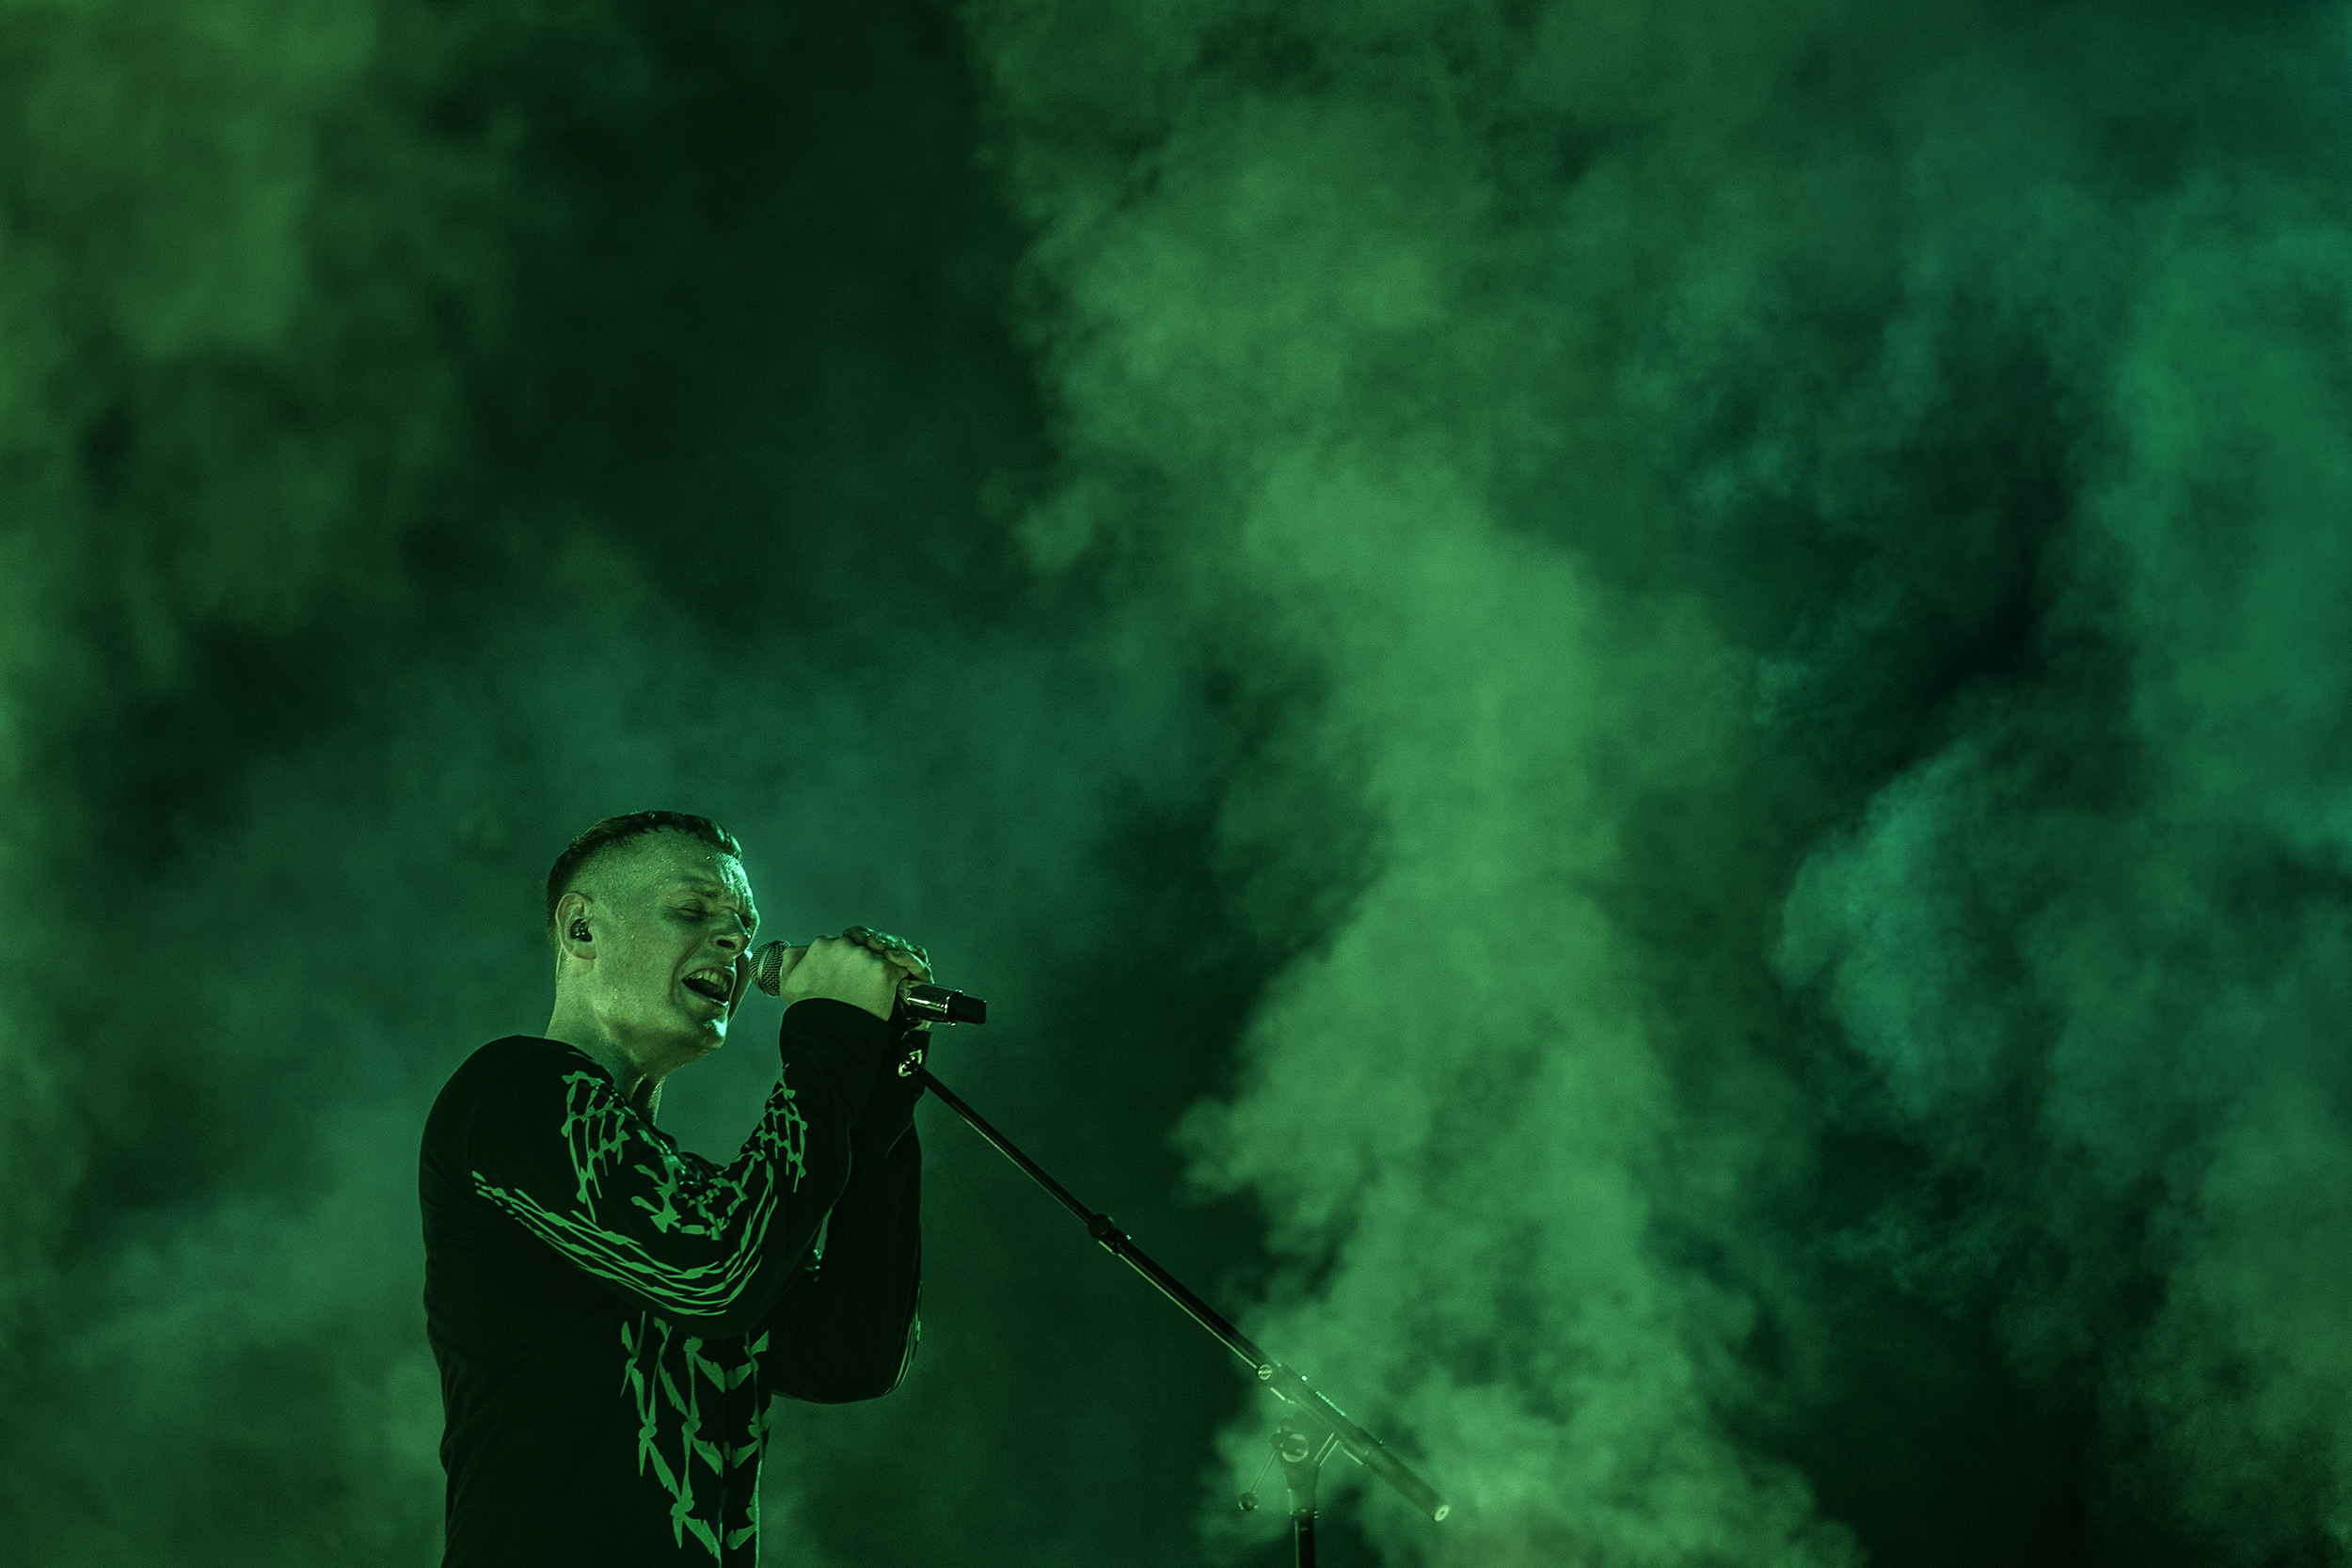 singer-on-stage-surrounded-by-green-smoke.jpeg